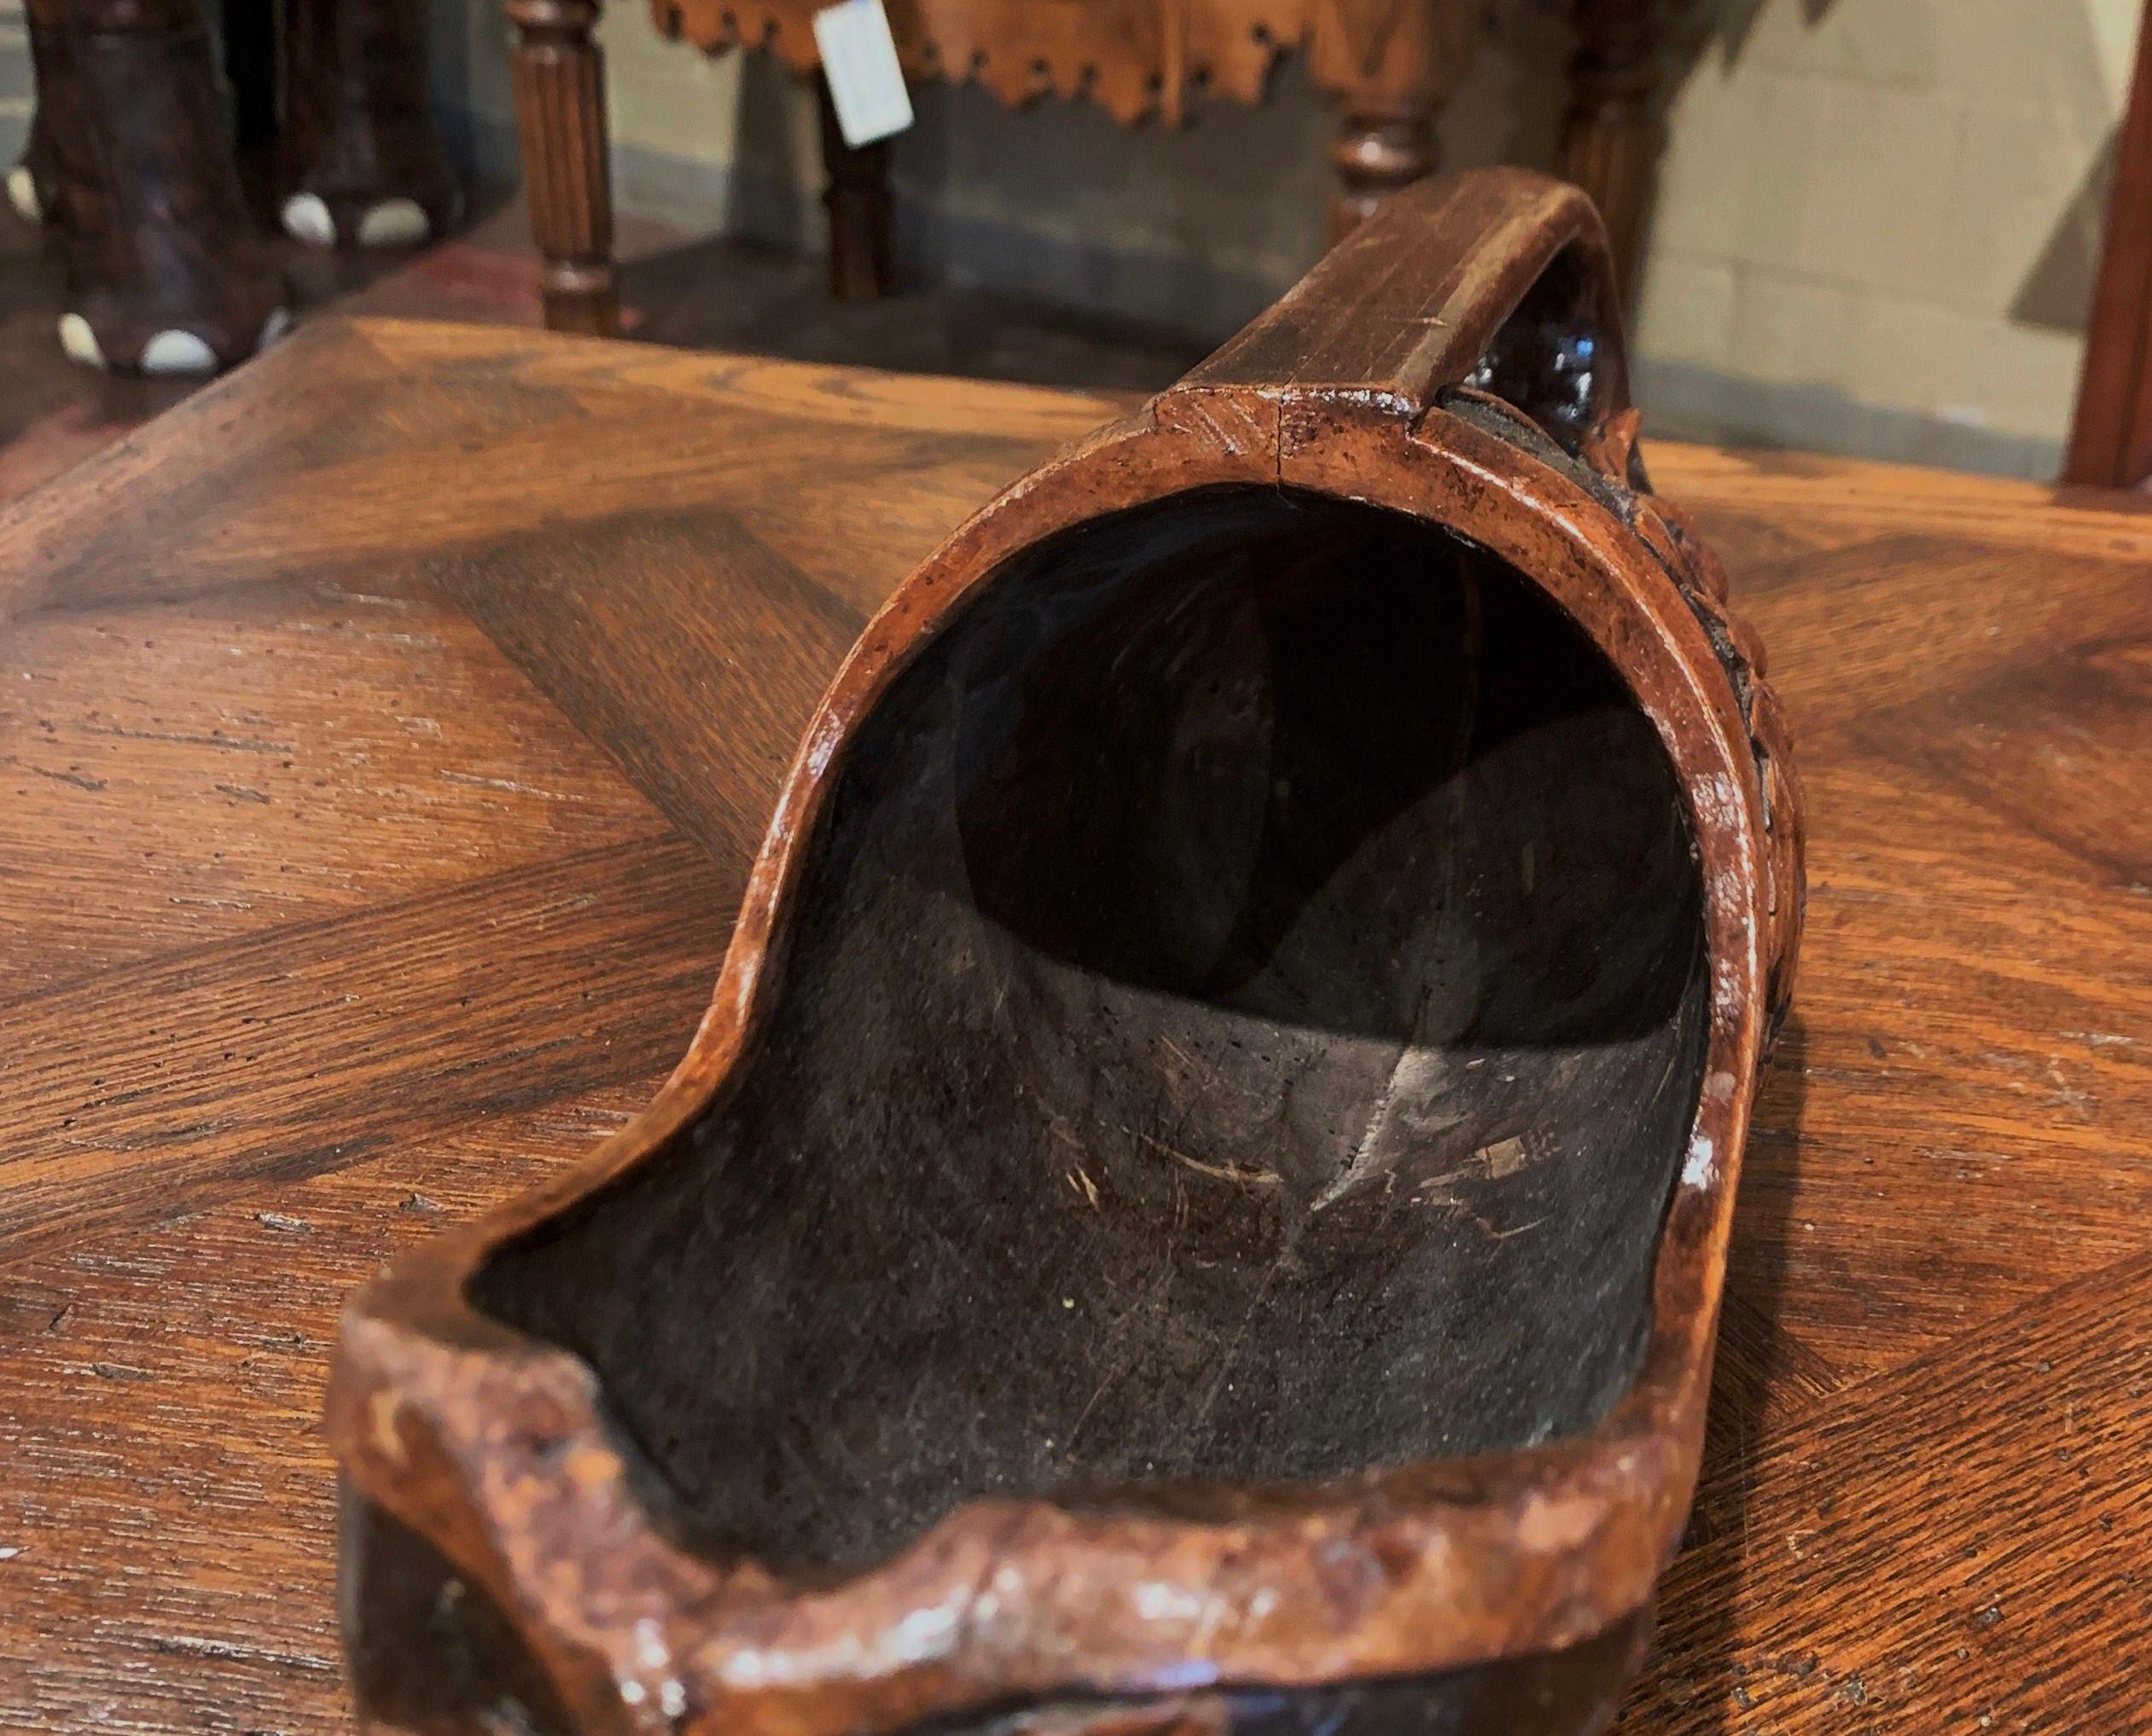 Early 20th Century French Carved Walnut Wine Bottle Holder Clog with Vine Decor For Sale 1